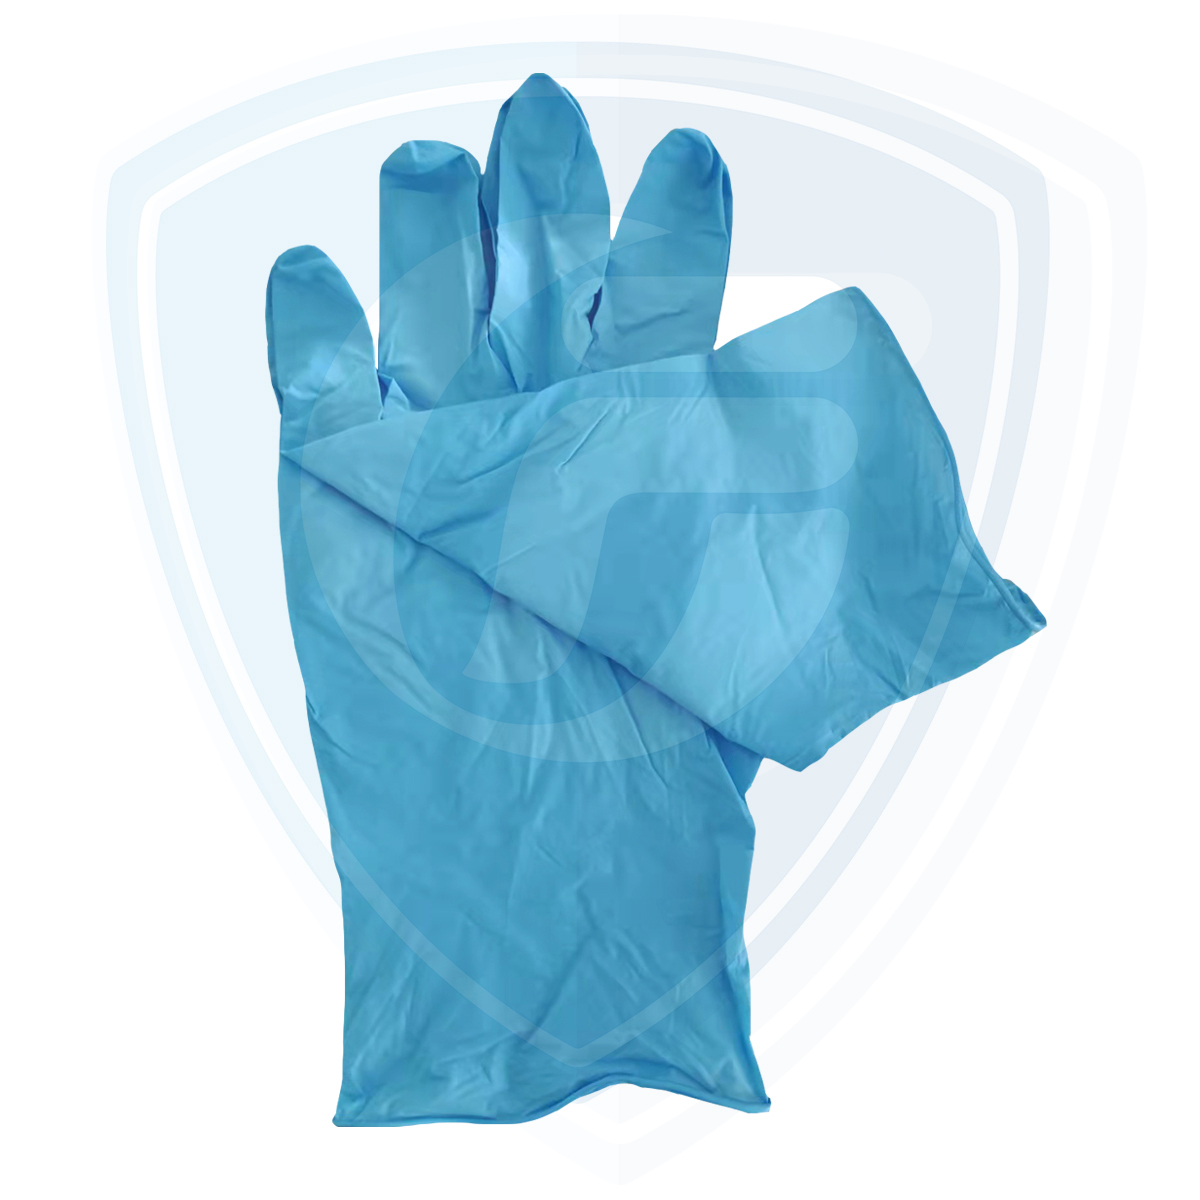 Great Value Powder-free Disposable Nitrile Exam Gloves Anti-Static 